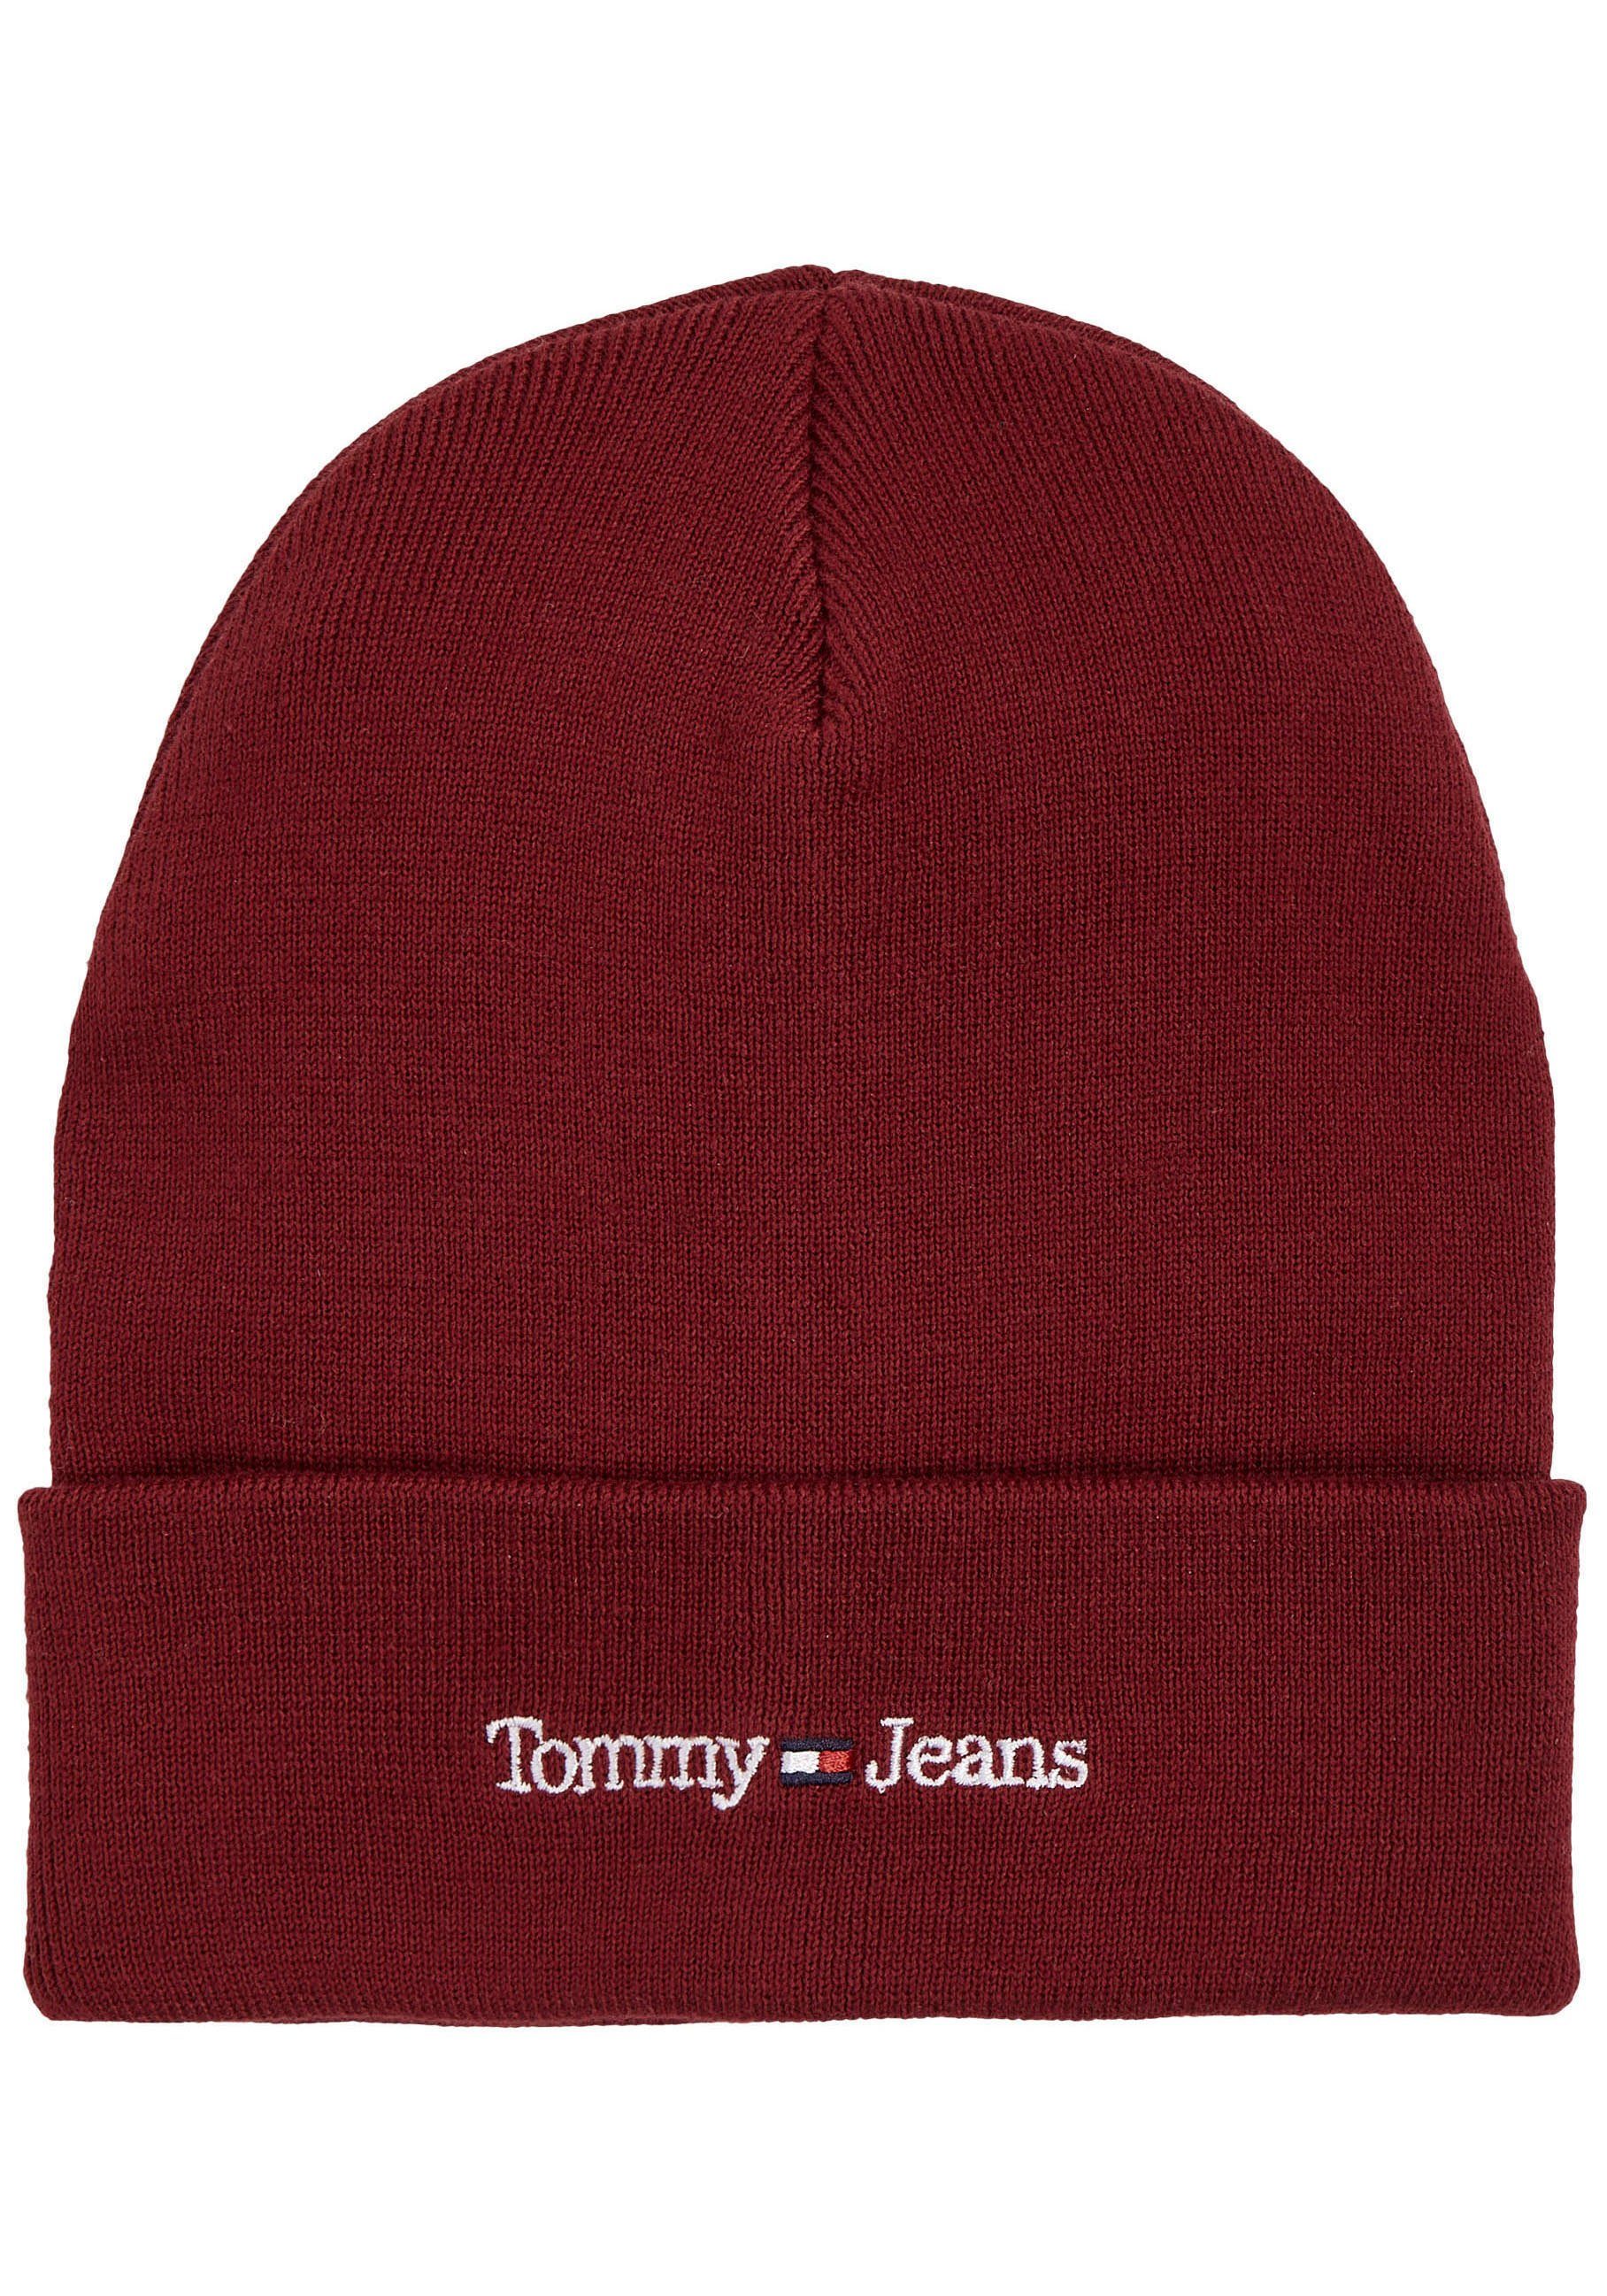 BEANIE SPORT Jeans Tommy Rouge TJM Beanie